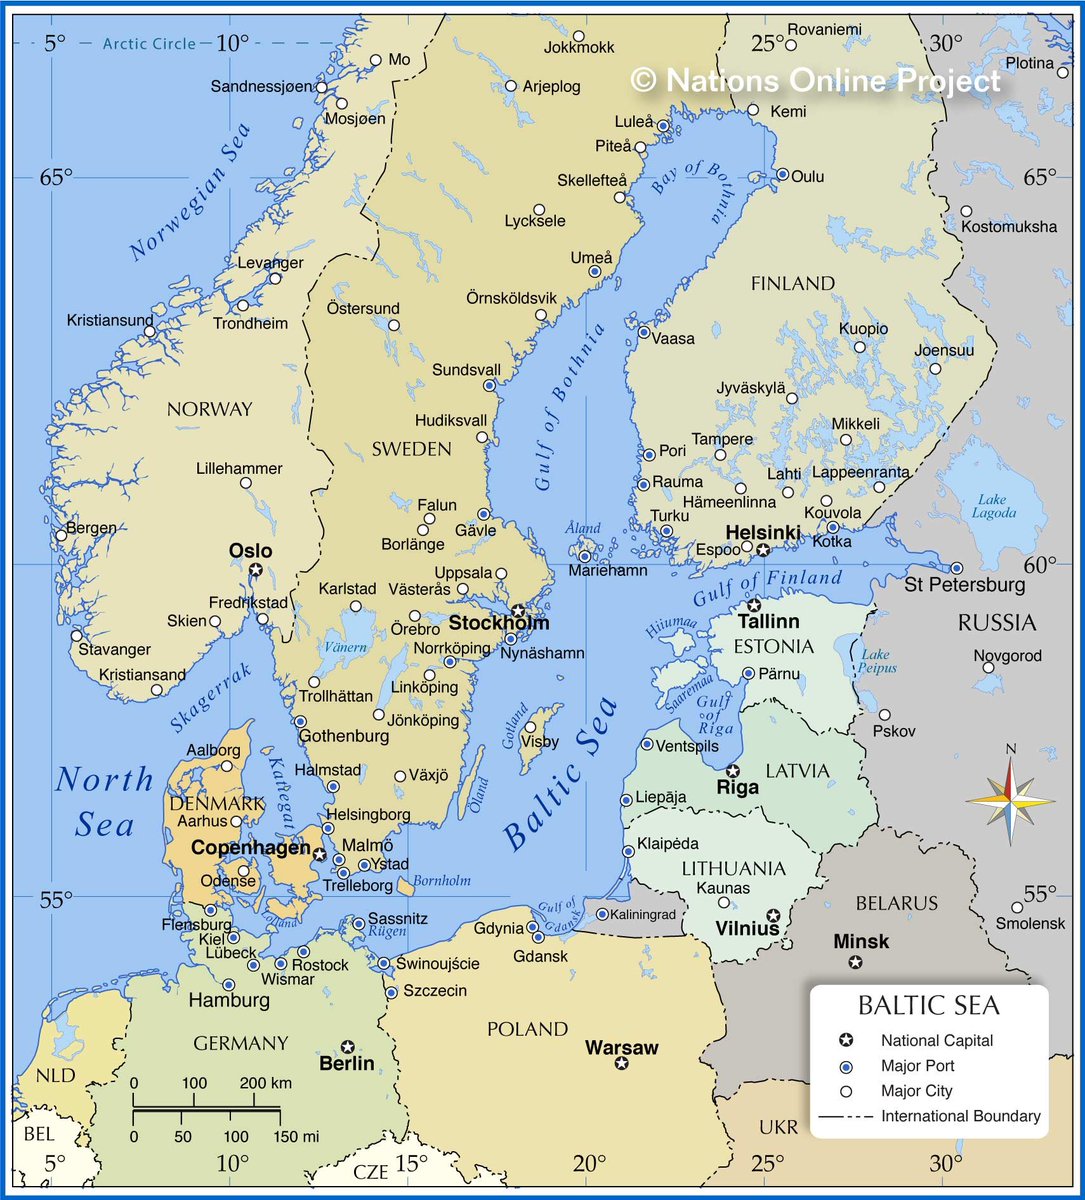 Not wanting to further entangle local health authorities in that country (or maybe cause extradition?), the plan is for Querrey to keep his whereabouts undisclosed (cue the Carmen Sandiego theme, Rockapella), but here's a map of the region. October is lovely around the Baltic!